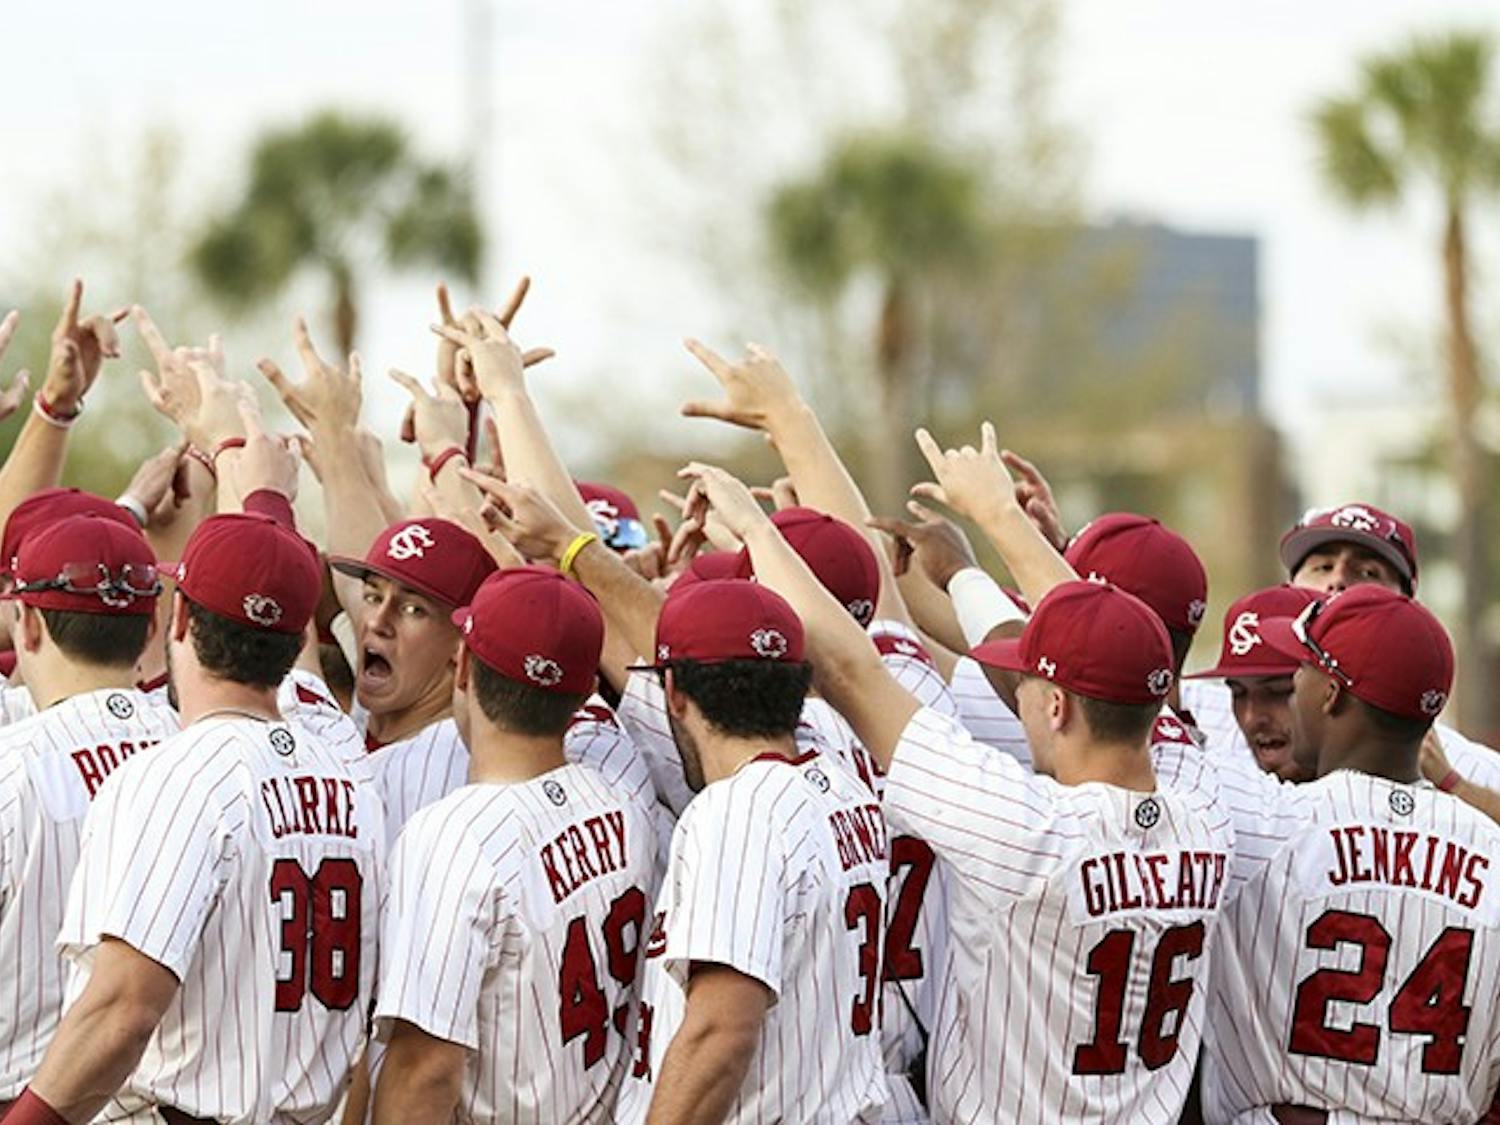 The South Carolina baseball team gathers together before the Friday night game against Auburn at Founders Park.